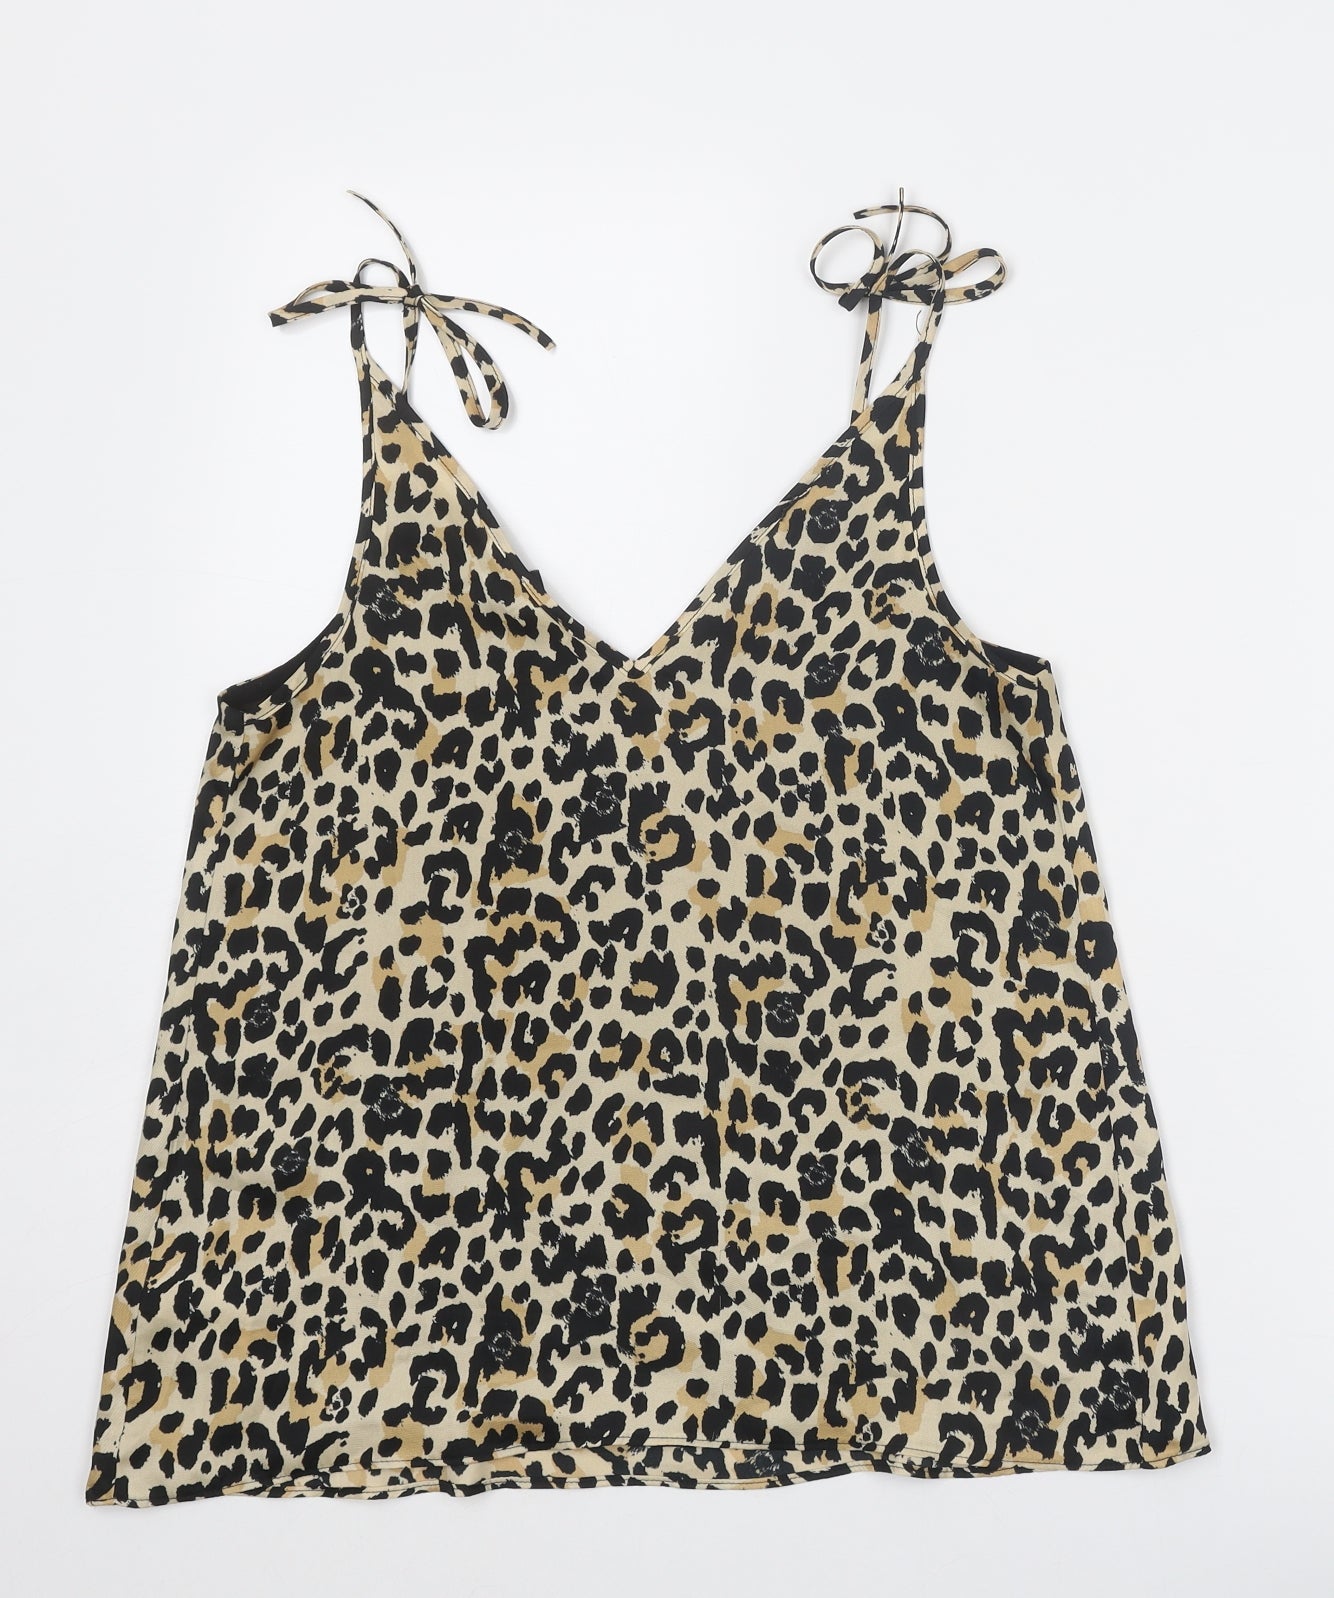 River Island Womens Multicoloured Animal Print Polyester Camisole Tank Size 10 V-Neck - Leopard Print